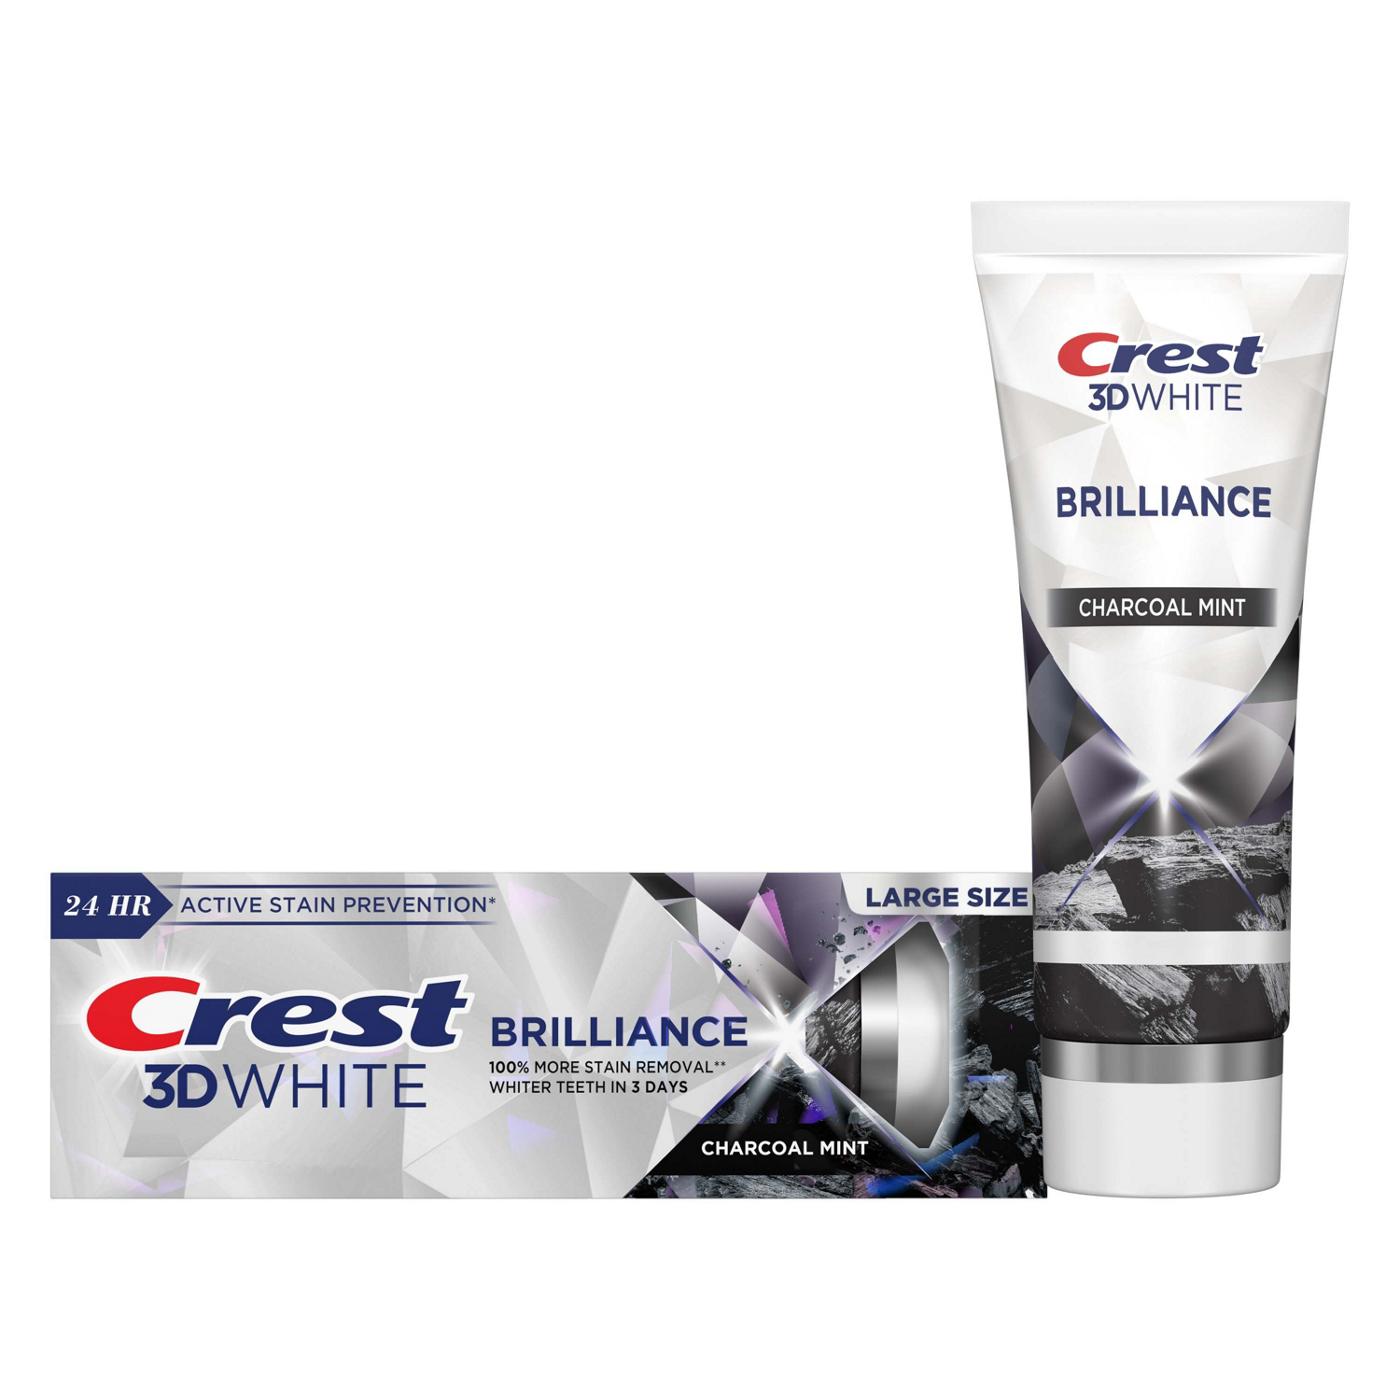 Crest 3D White Brilliance Toothpaste - Charcoal Mint ; image 6 of 7